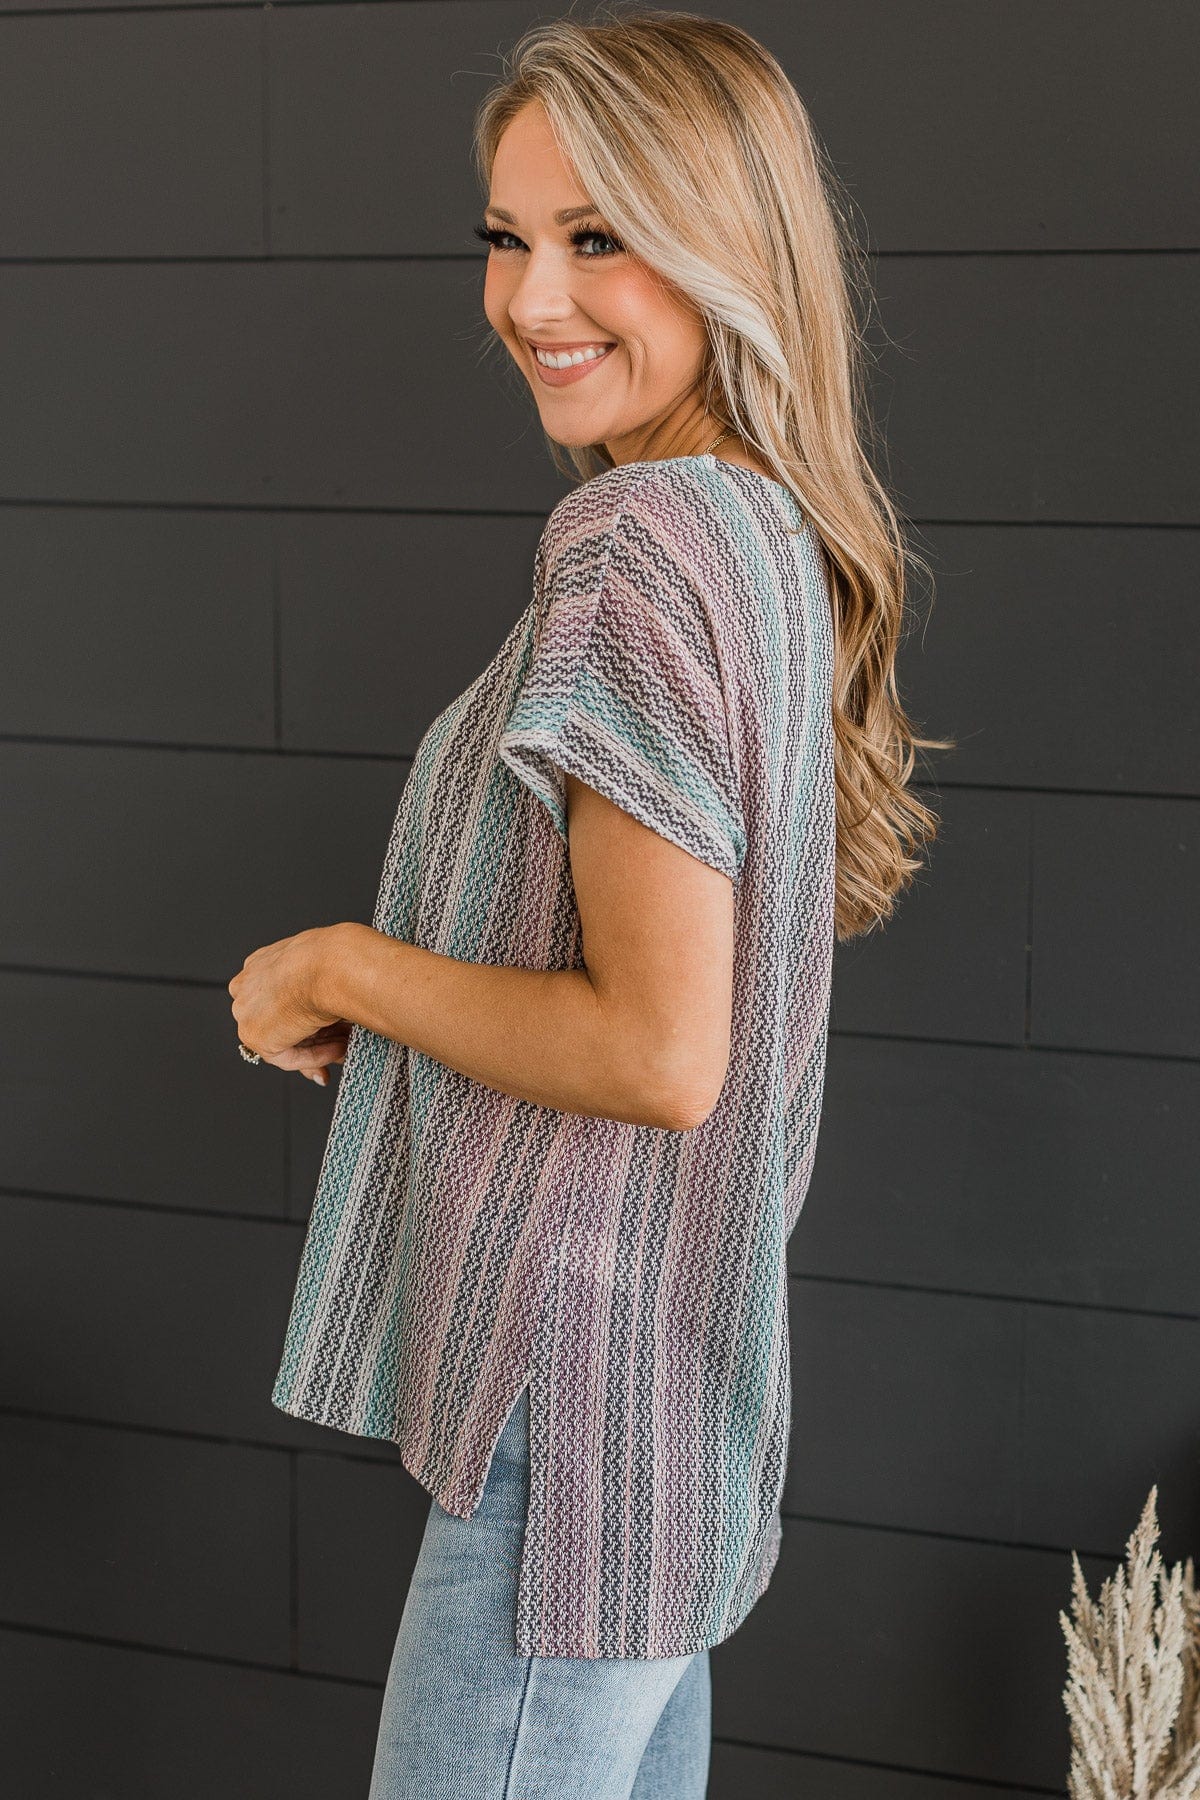 Feeling Sparks Knit Top- Charcoal, Mauve, & Blue